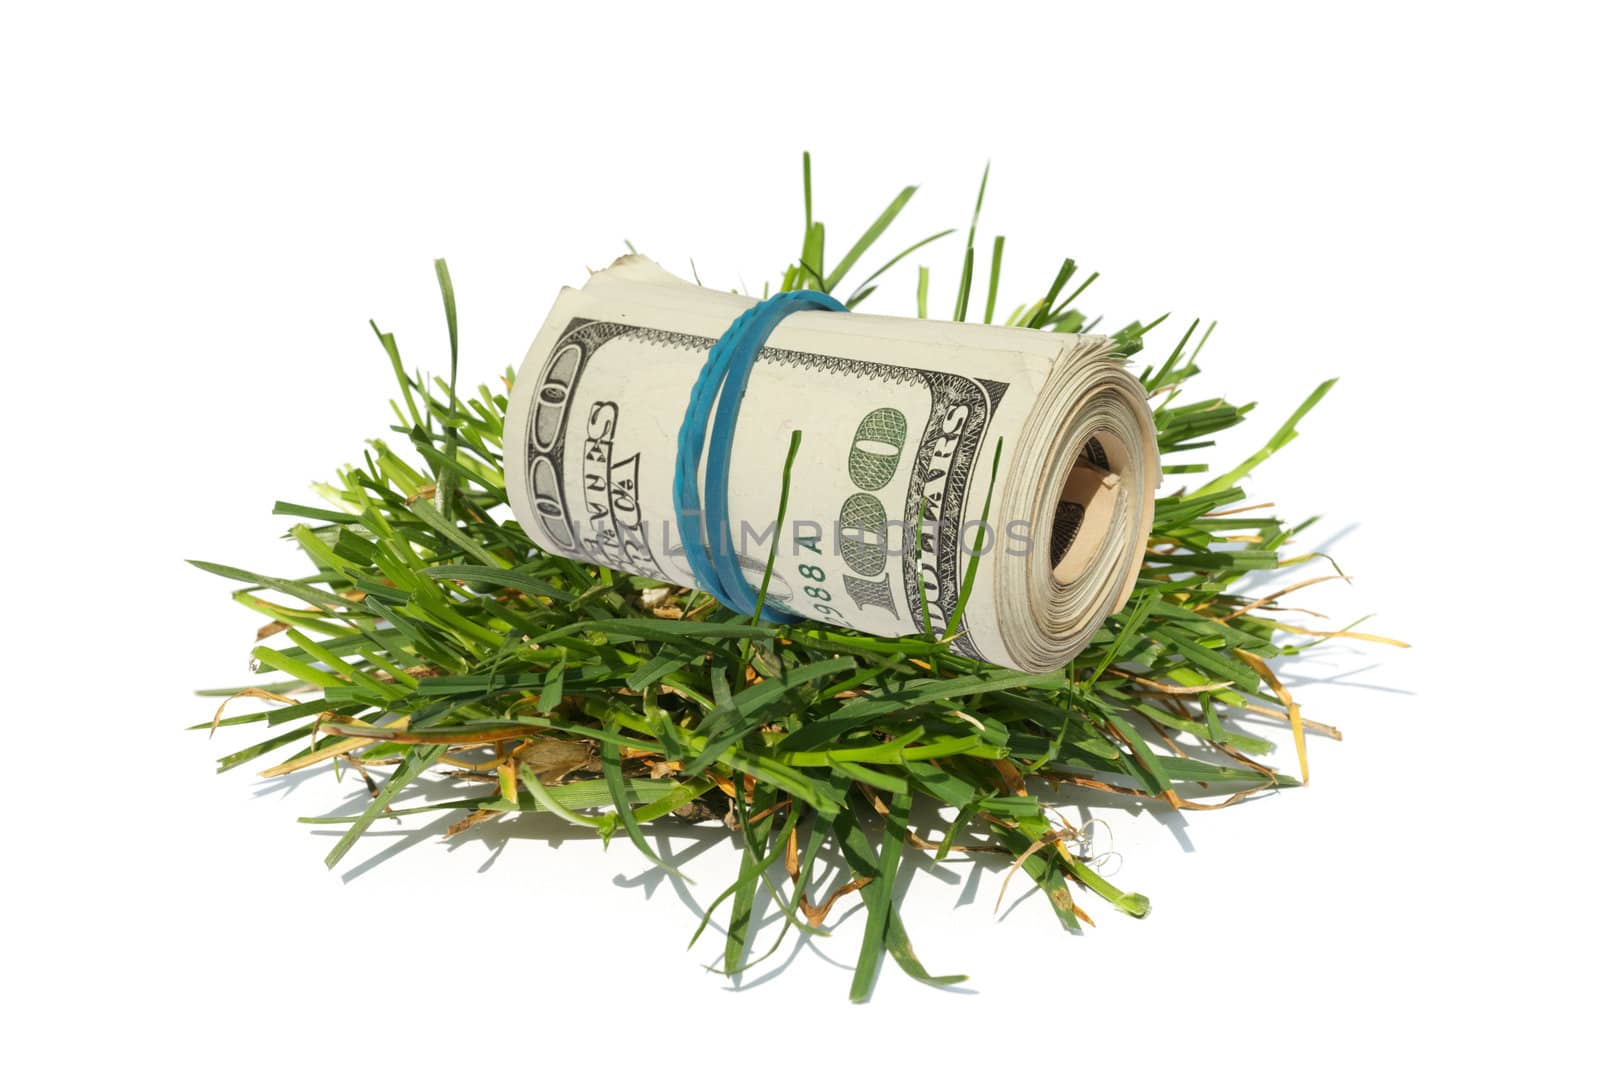 The US dollars lay on a green grass